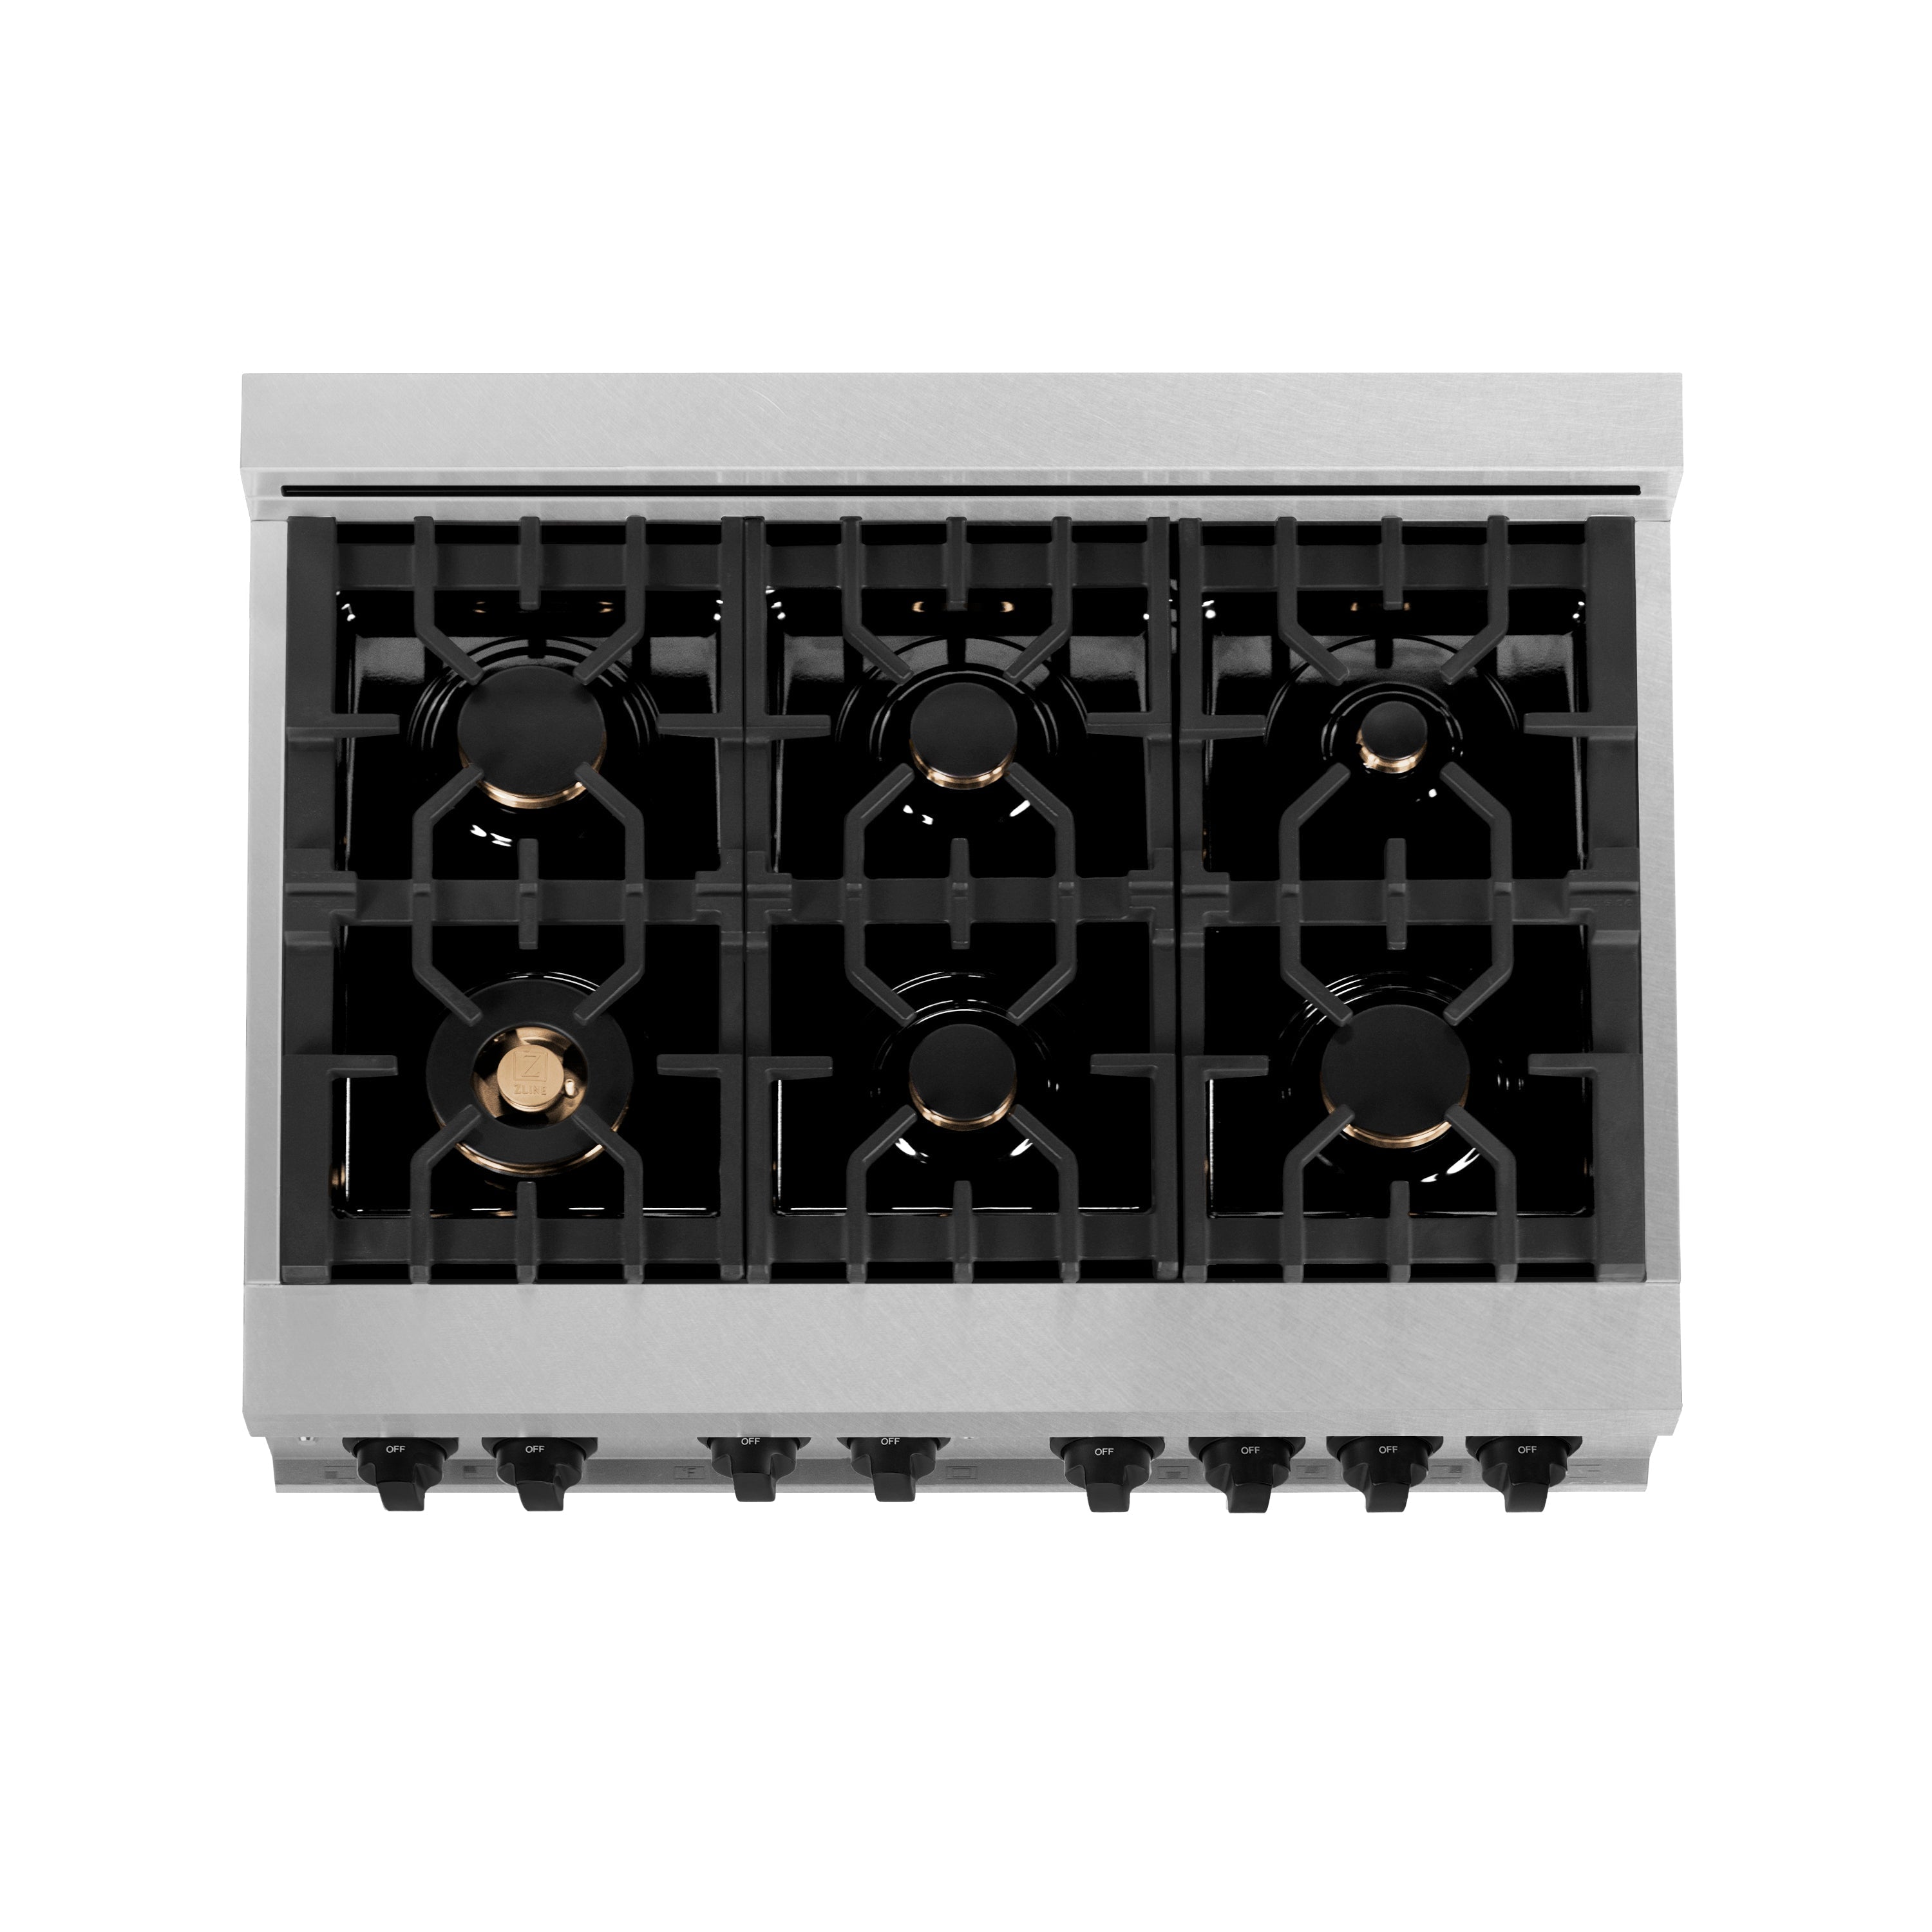 ZLINE Autograph Edition 36 in. 4.6 cu. ft. Range with Gas Stove and Gas Oven in DuraSnow Stainless Steel with Accents (RGSZ-SN-36)